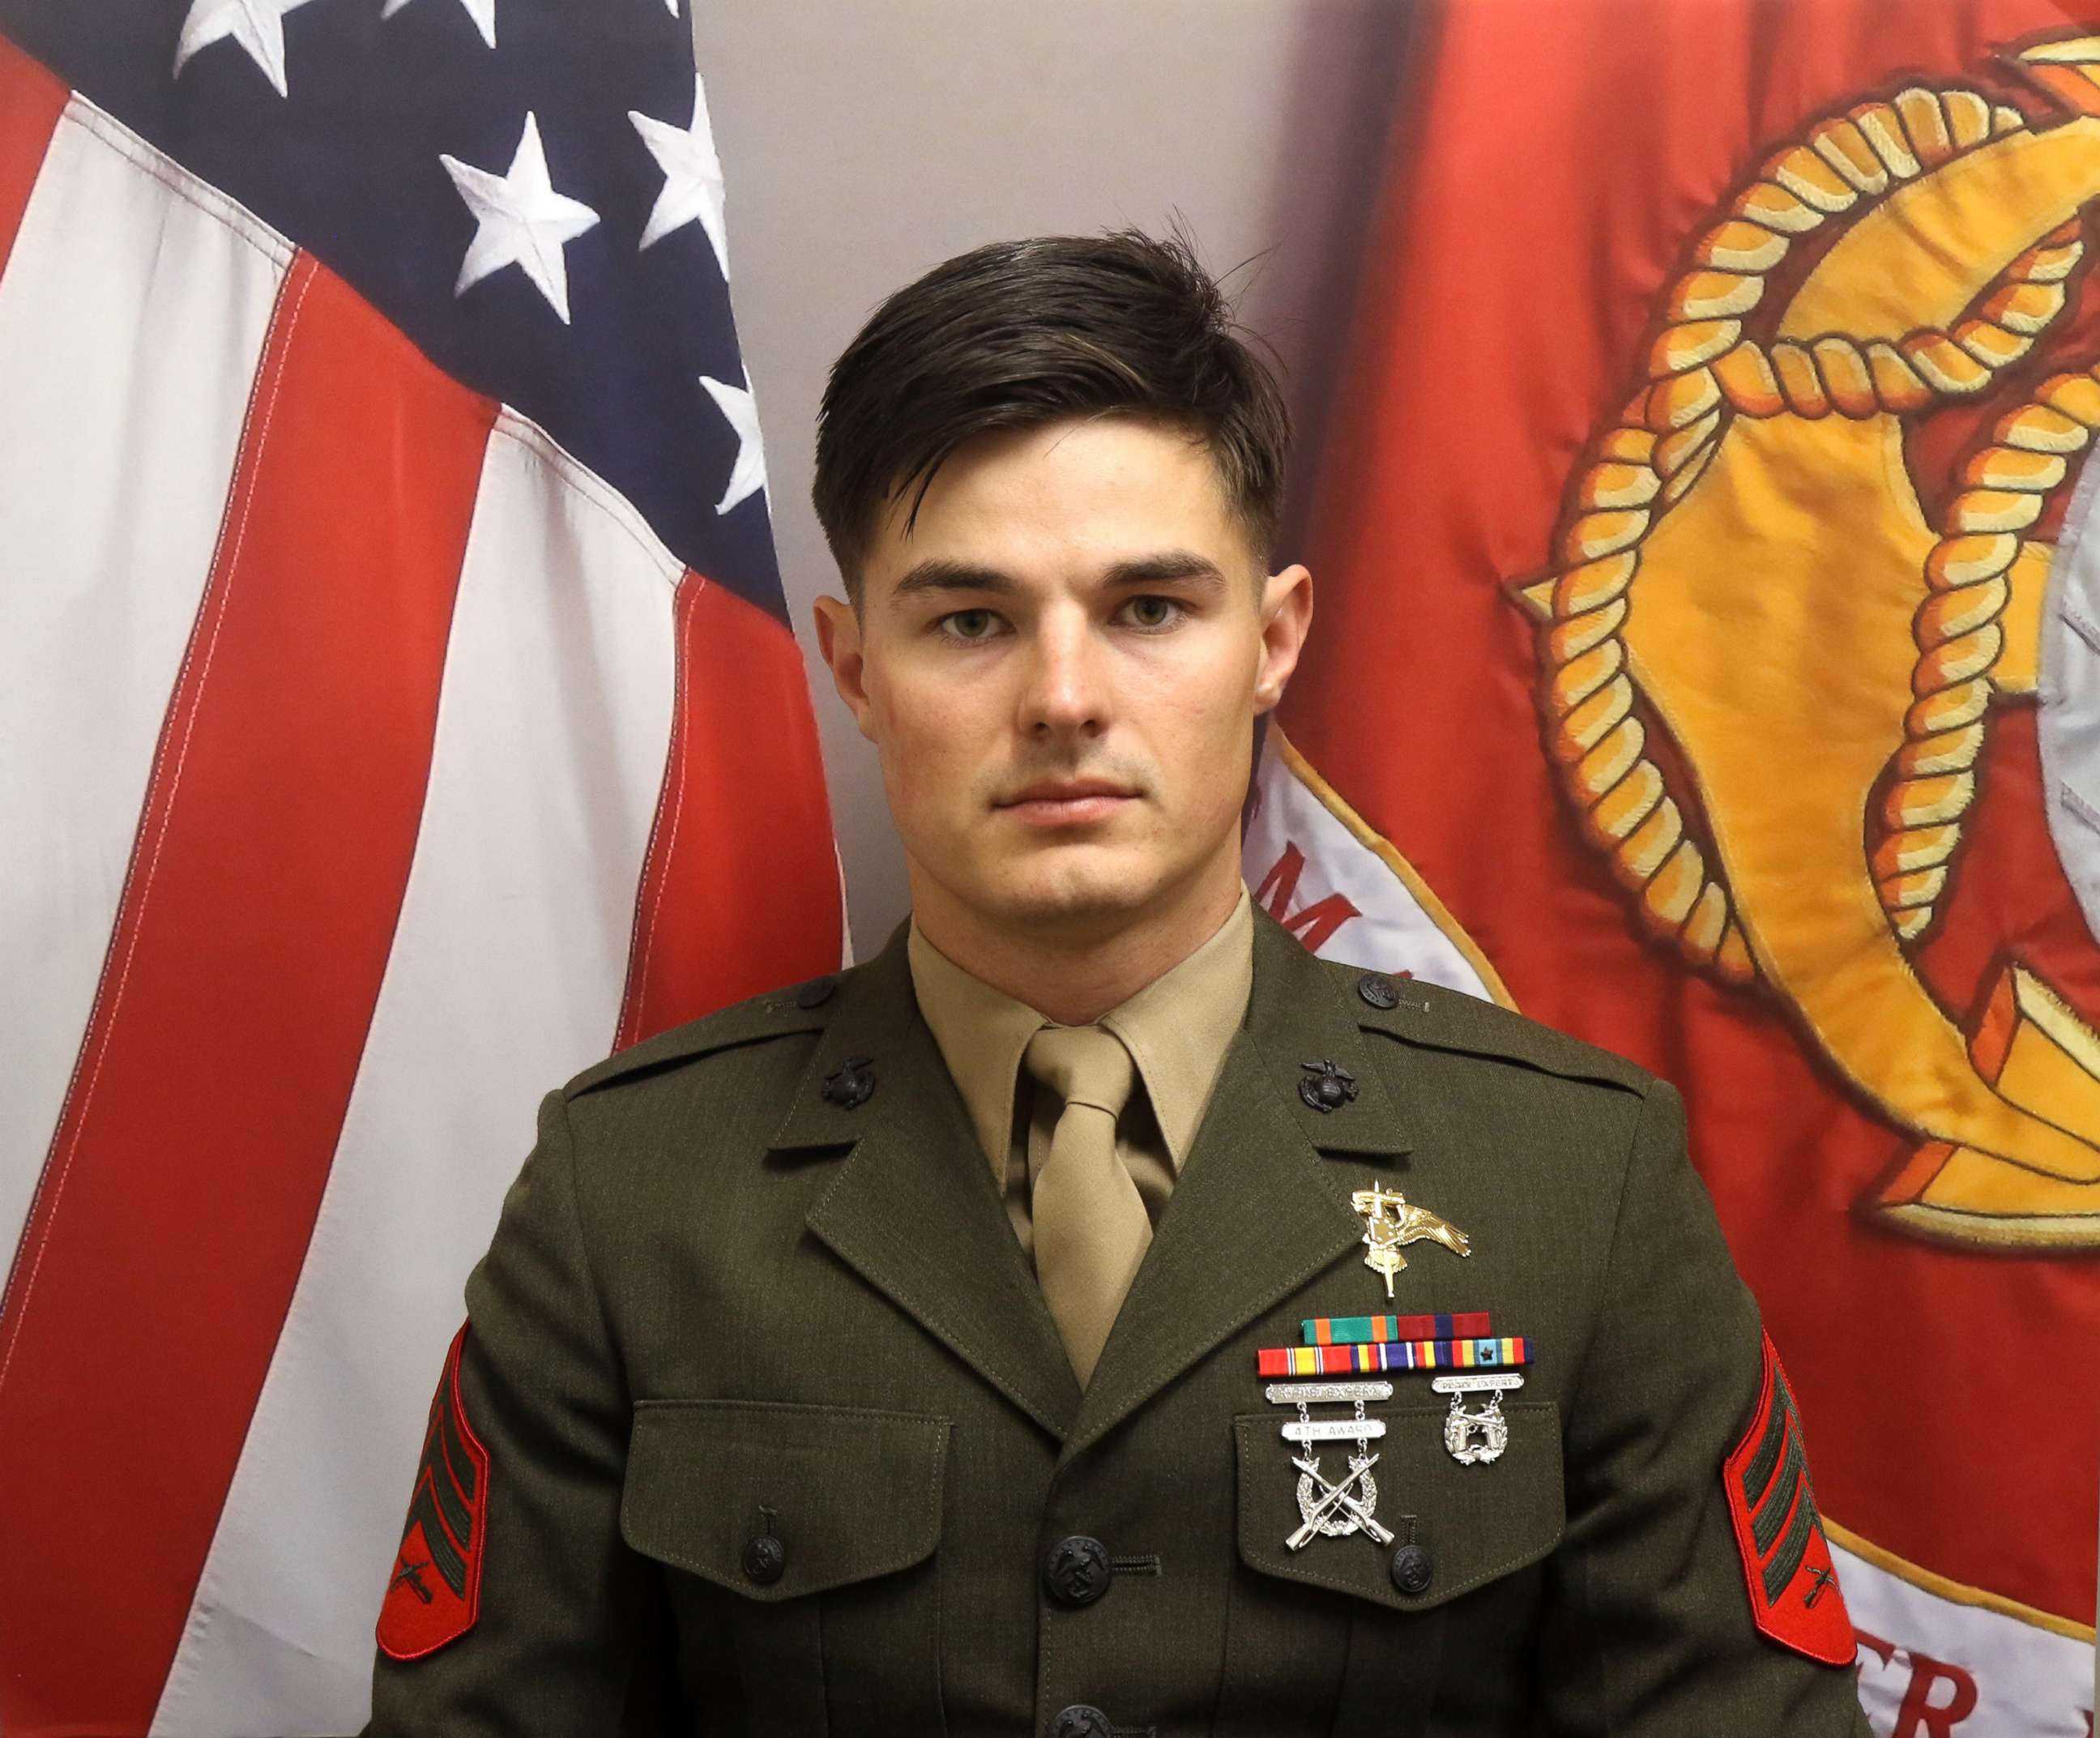 PHOTO: Staff Sgt. Joshua Braica, 29, of Sacramento, Calif., was identified as the Marine Raider who was killed over the weekend in a tactical vehicle accident at Camp Pendleton that occurred on April 13, 2019.